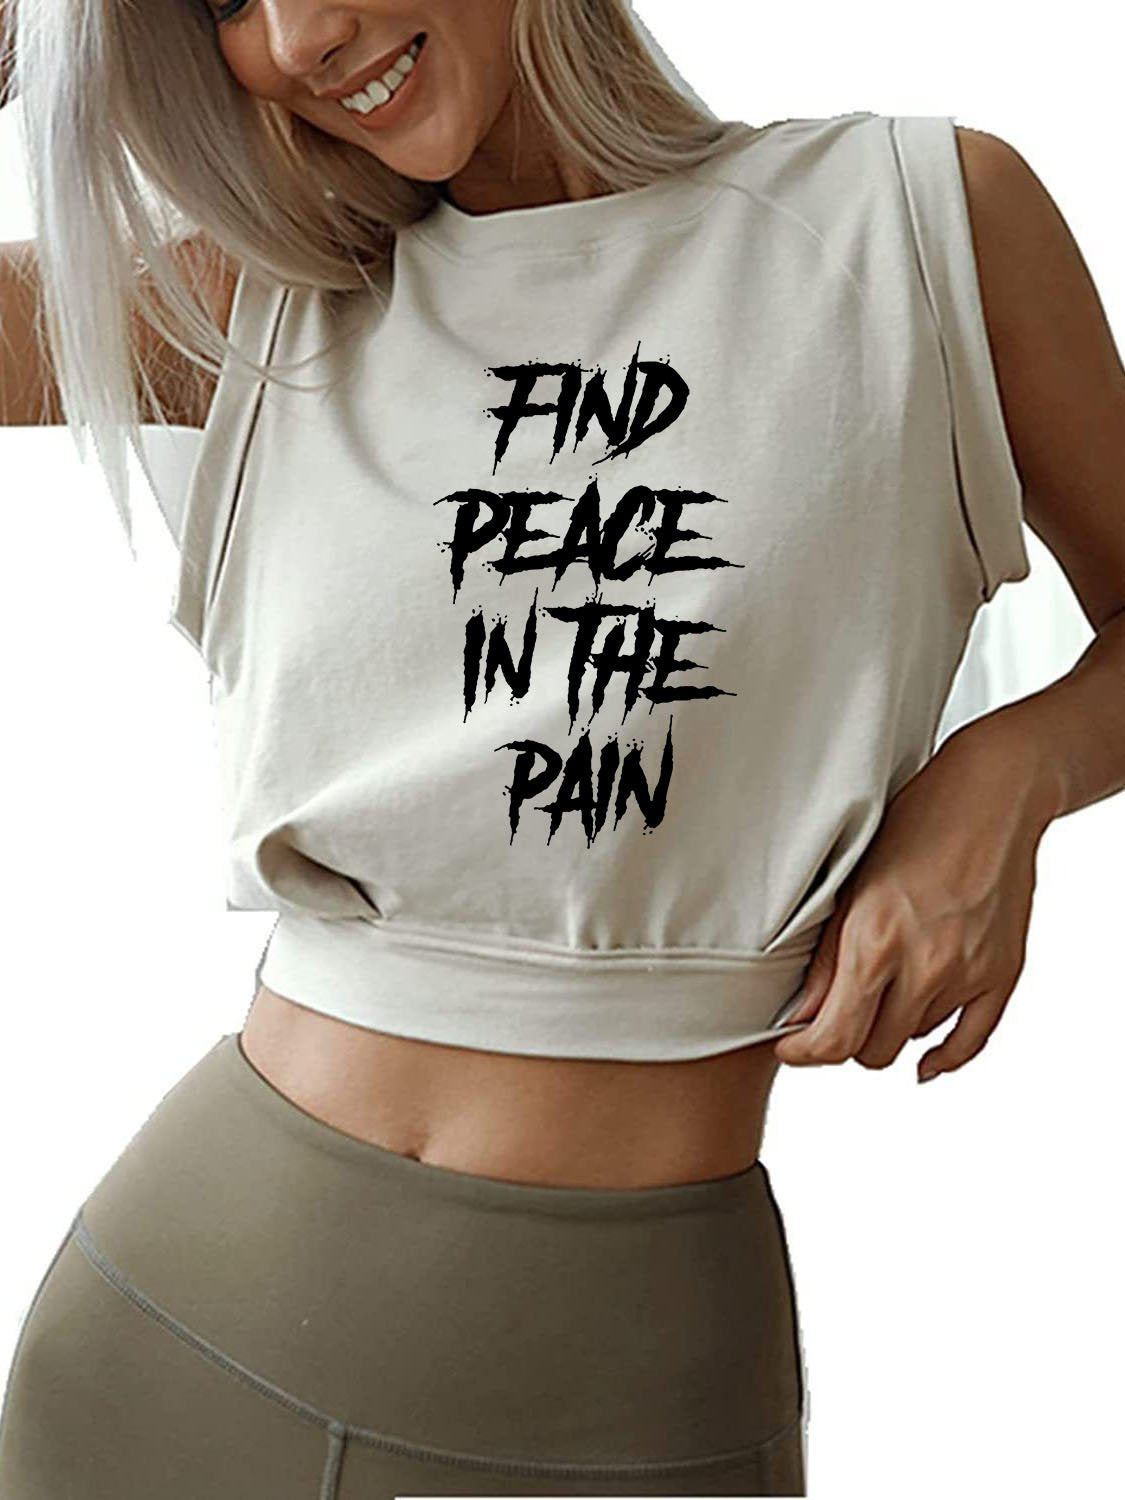 FIND PEACE IN THE PAIN Sleeveless Crop Tops